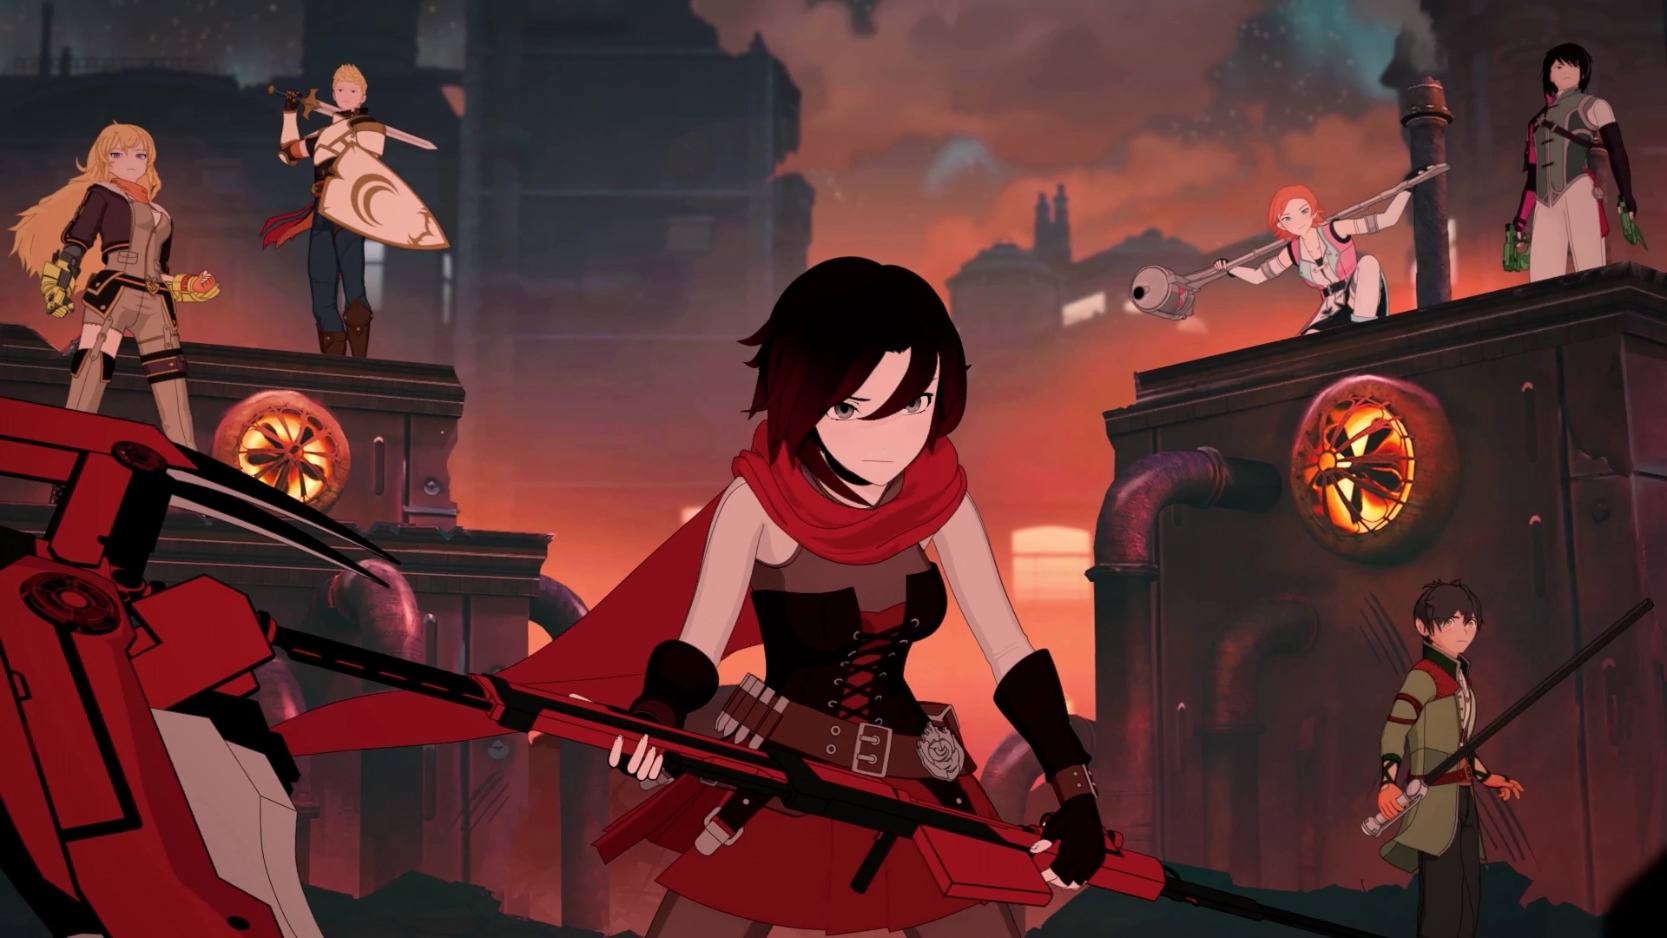 Related: RWBY